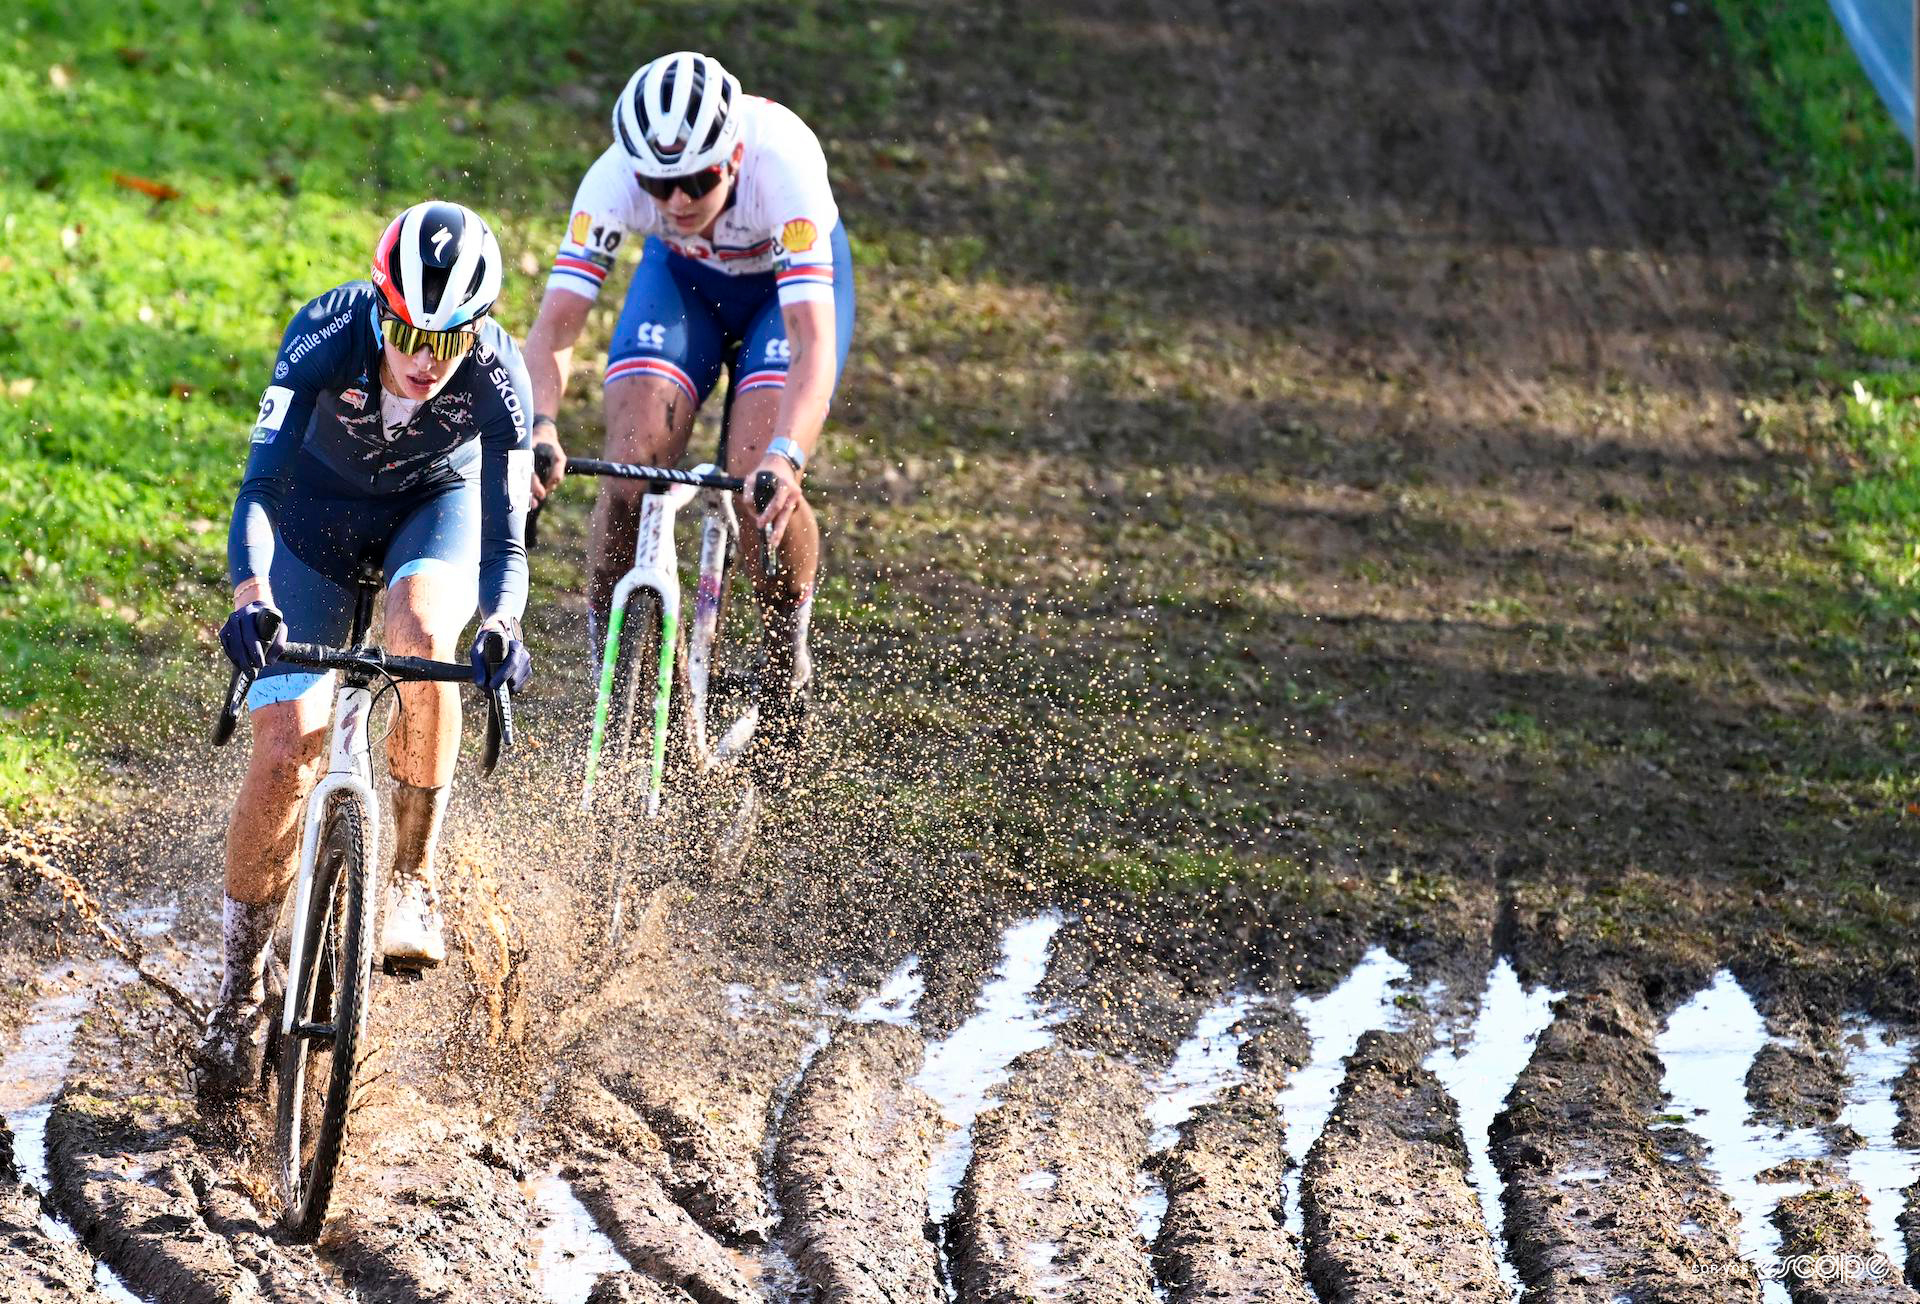 Marie Schreiber and Zoe Bäckstedt ride through heavily rutted mud as the sun shines on the women's under-23 cyclocross european championship race.